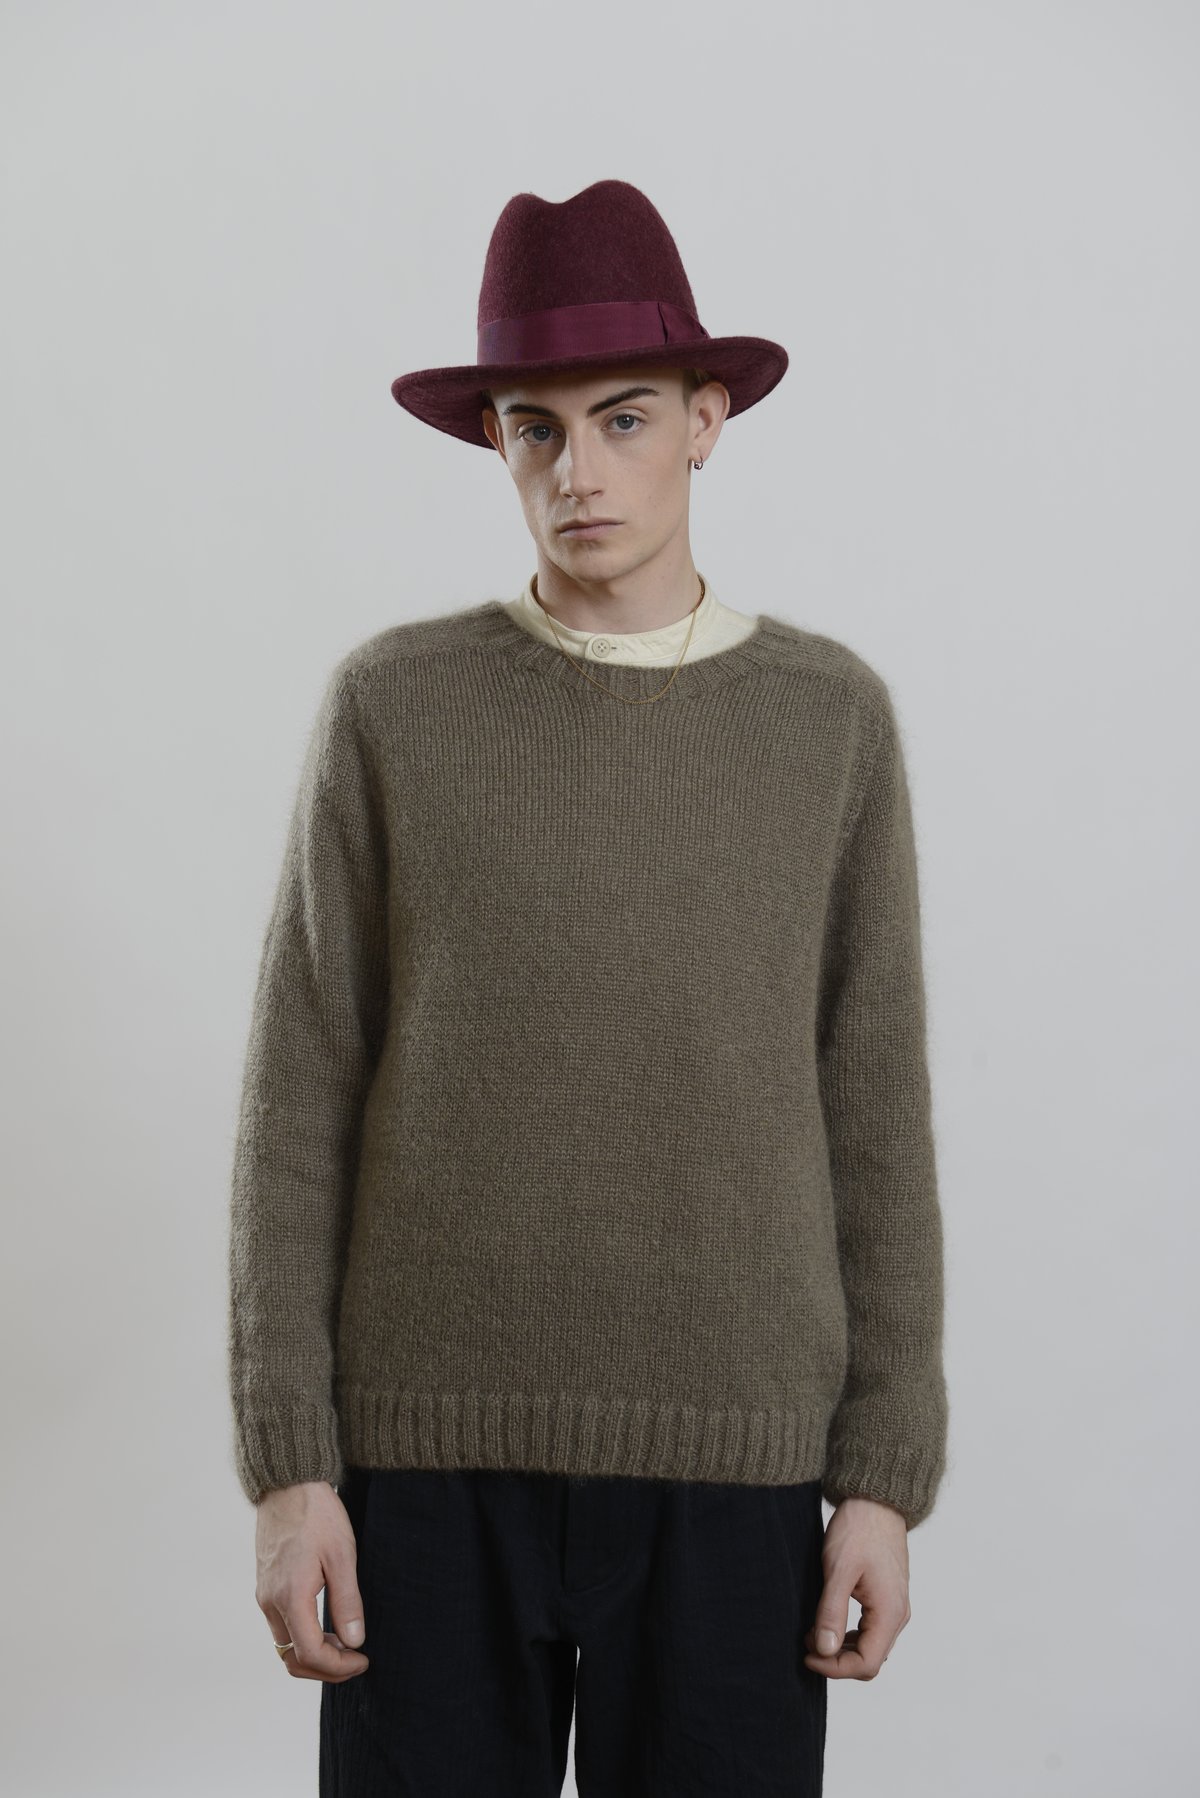 Image of Brixton Hat in Plum wool £150.00